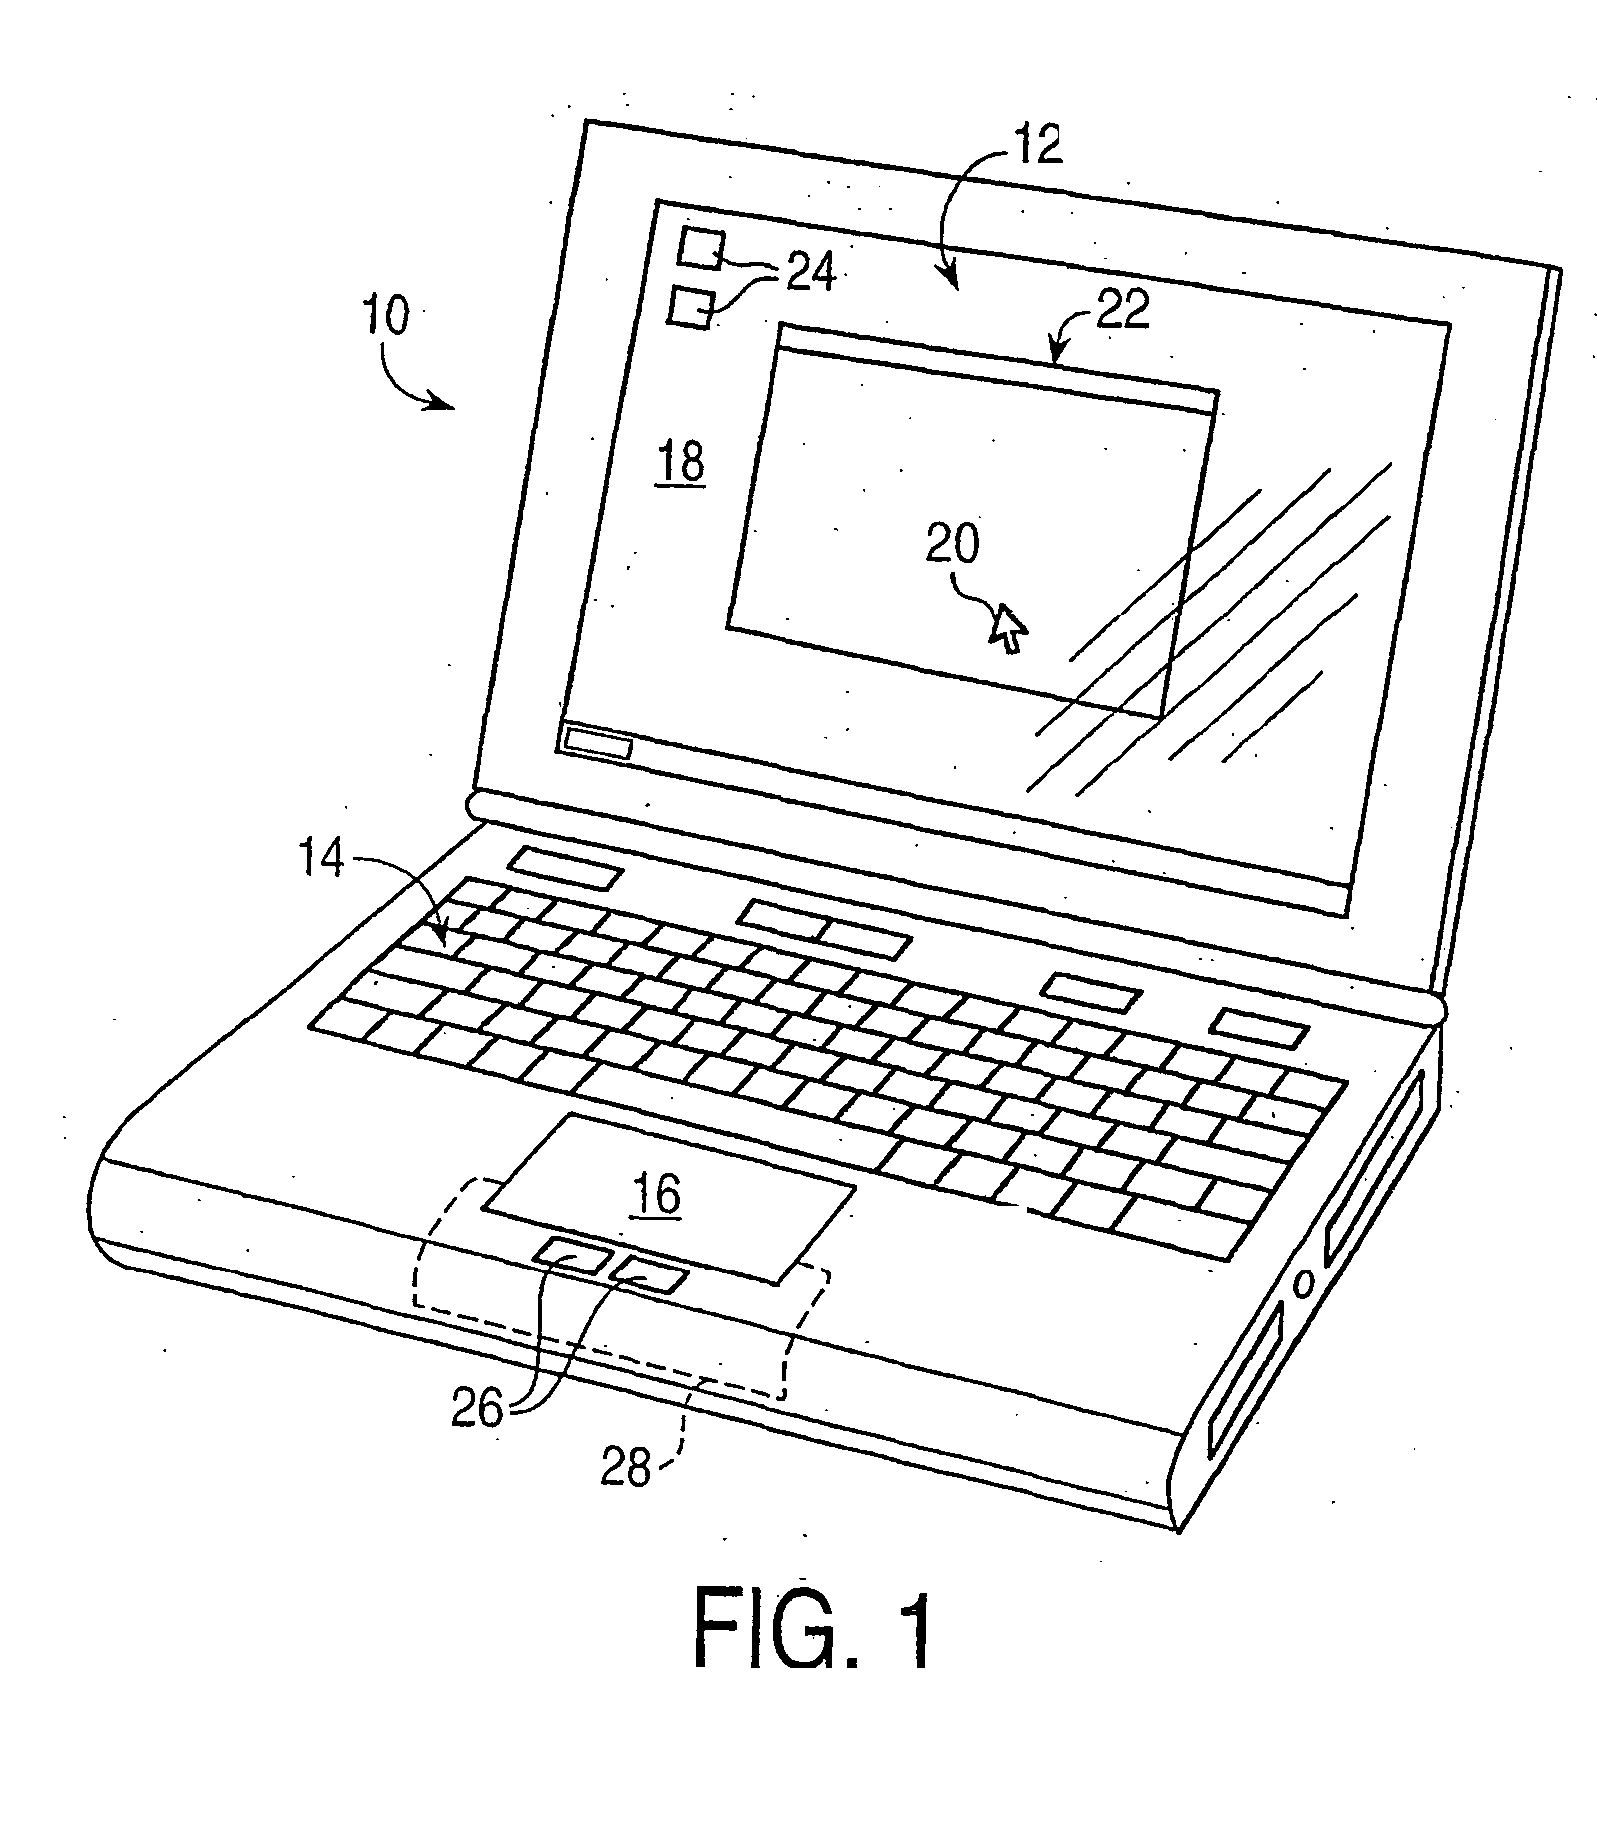 Haptic interface for laptop computers and other portable devices